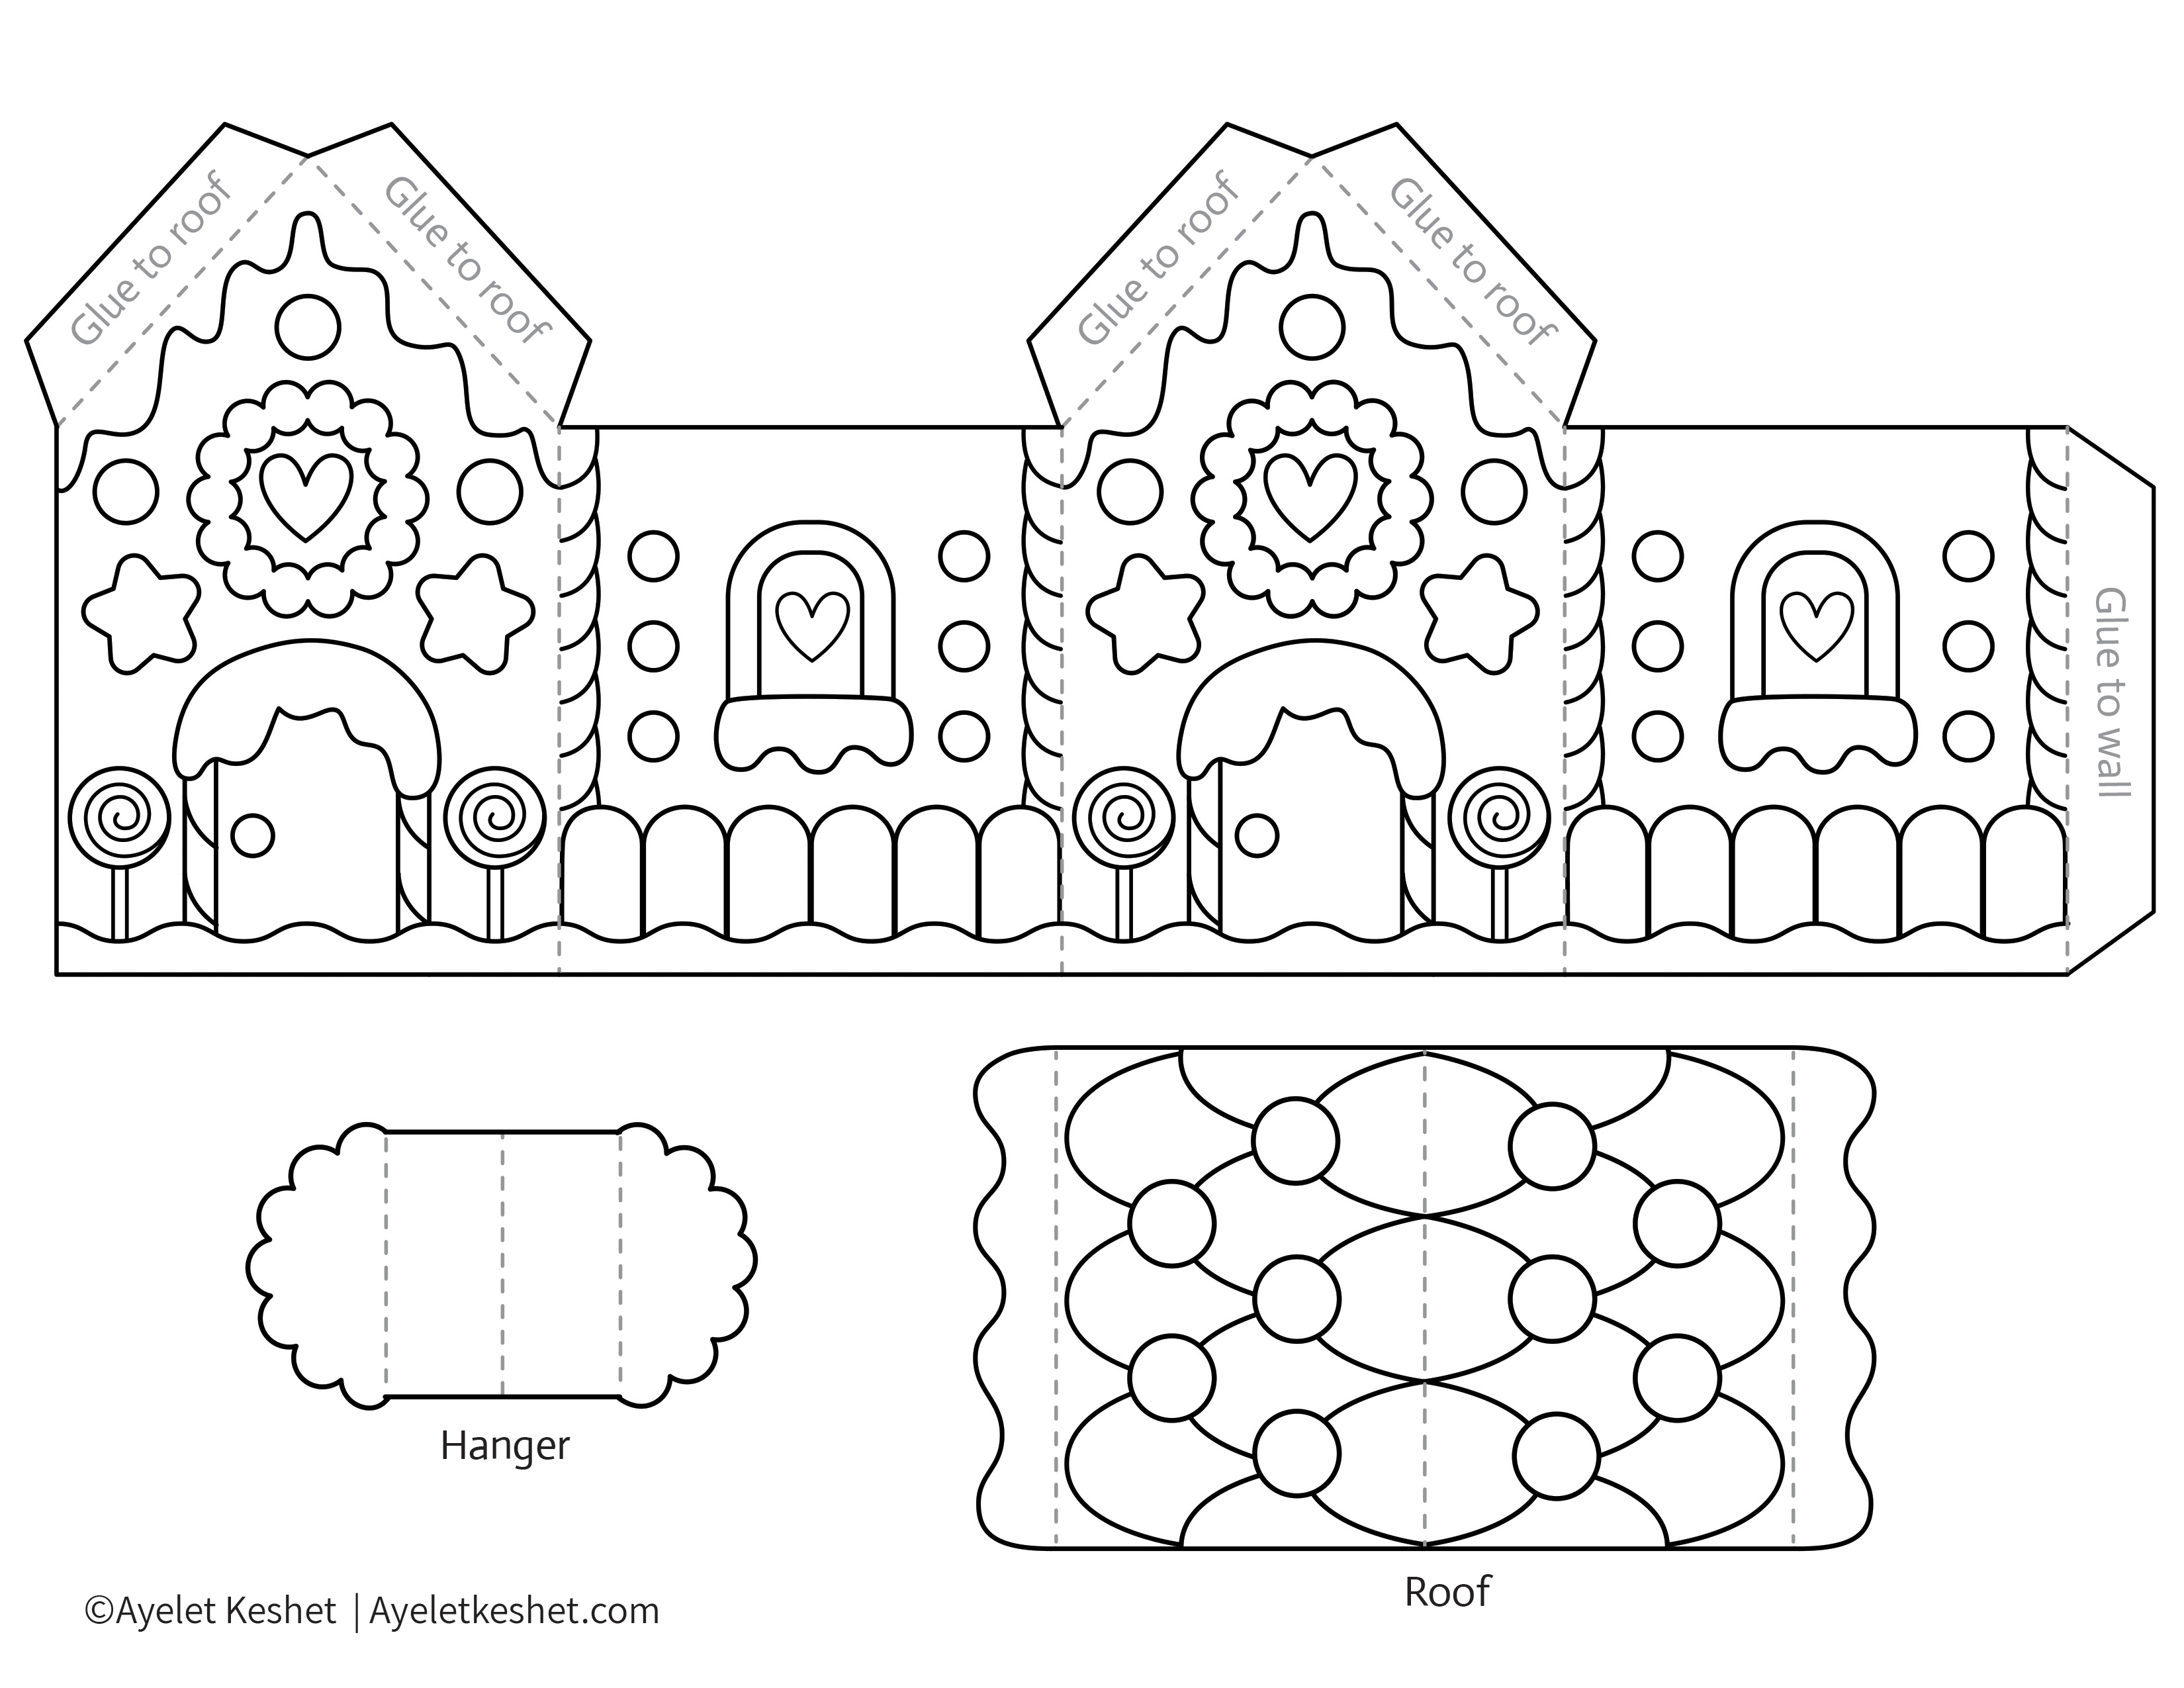 Printable gingerbread house template to color Ayelet Keshet